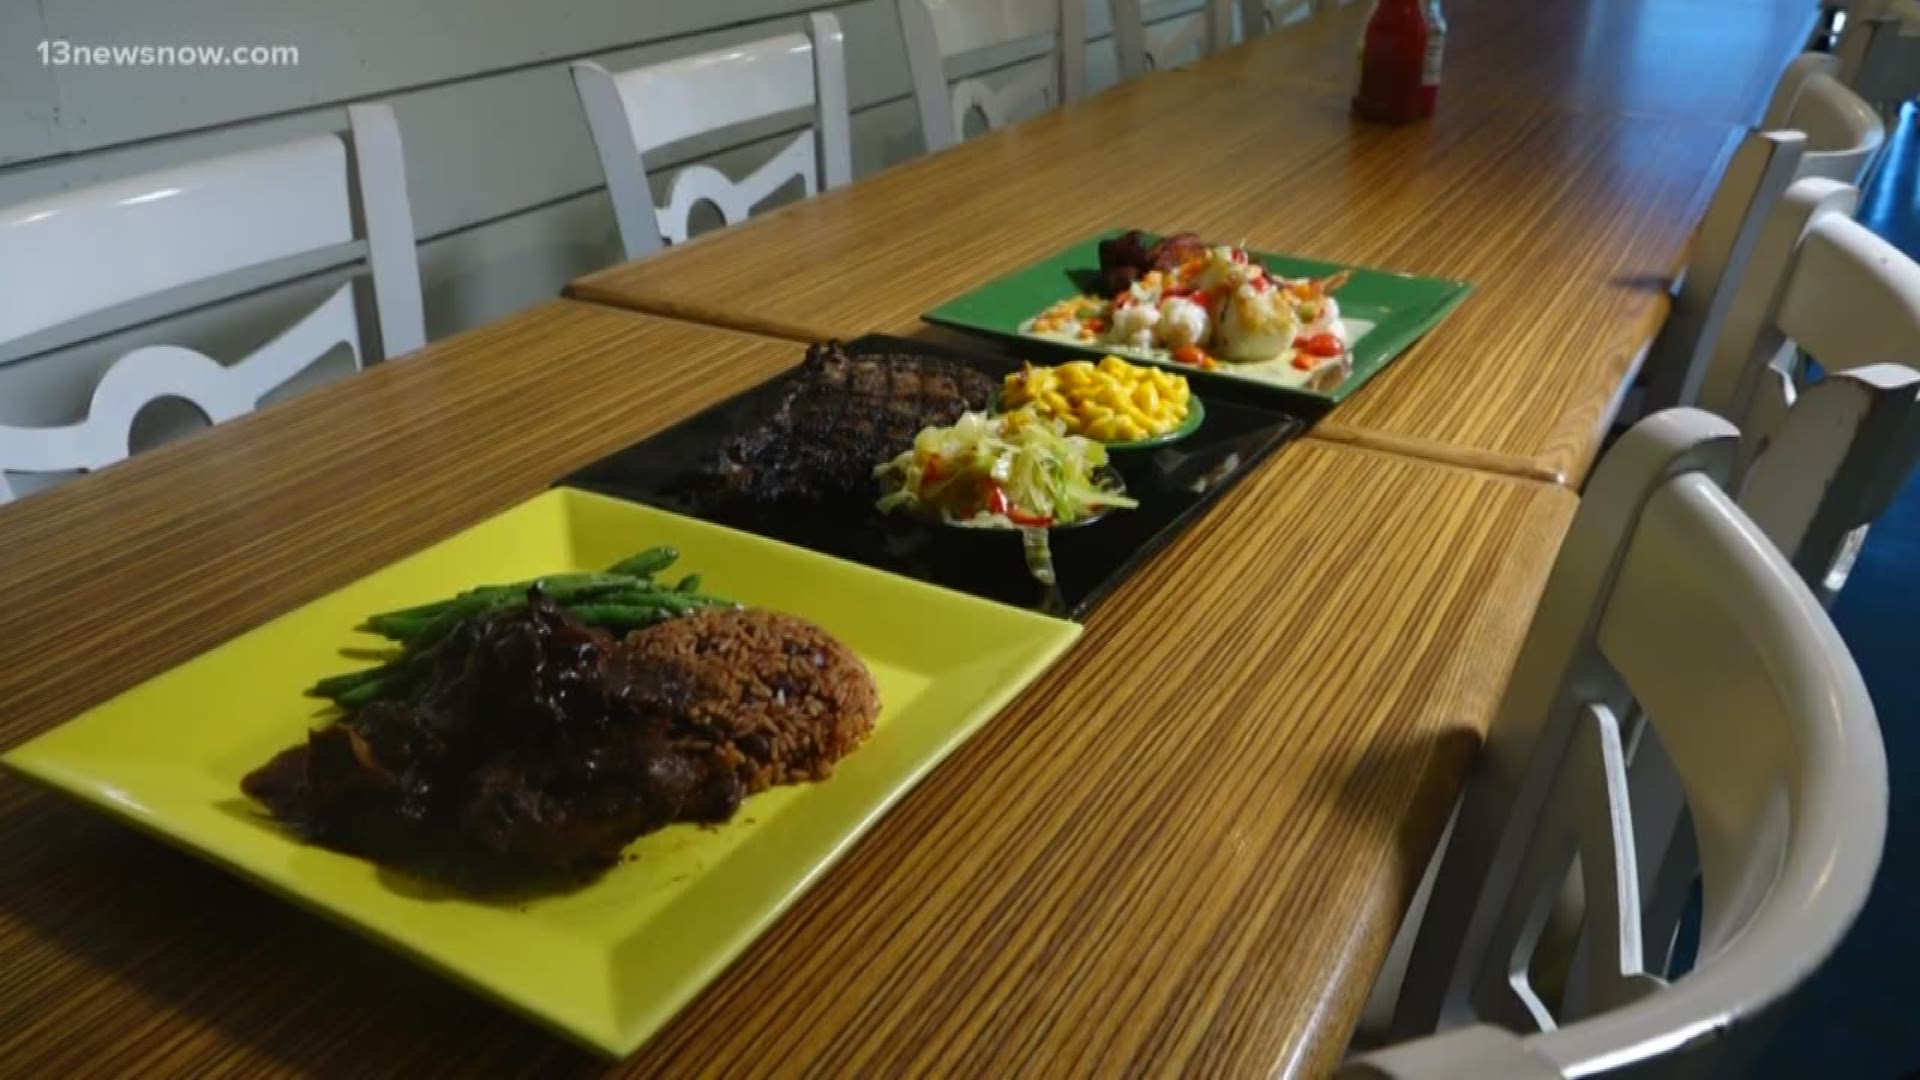 Cutlass Grille in Chesapeake offers traditional Jamaican fare and a Sunday brunch buffet.